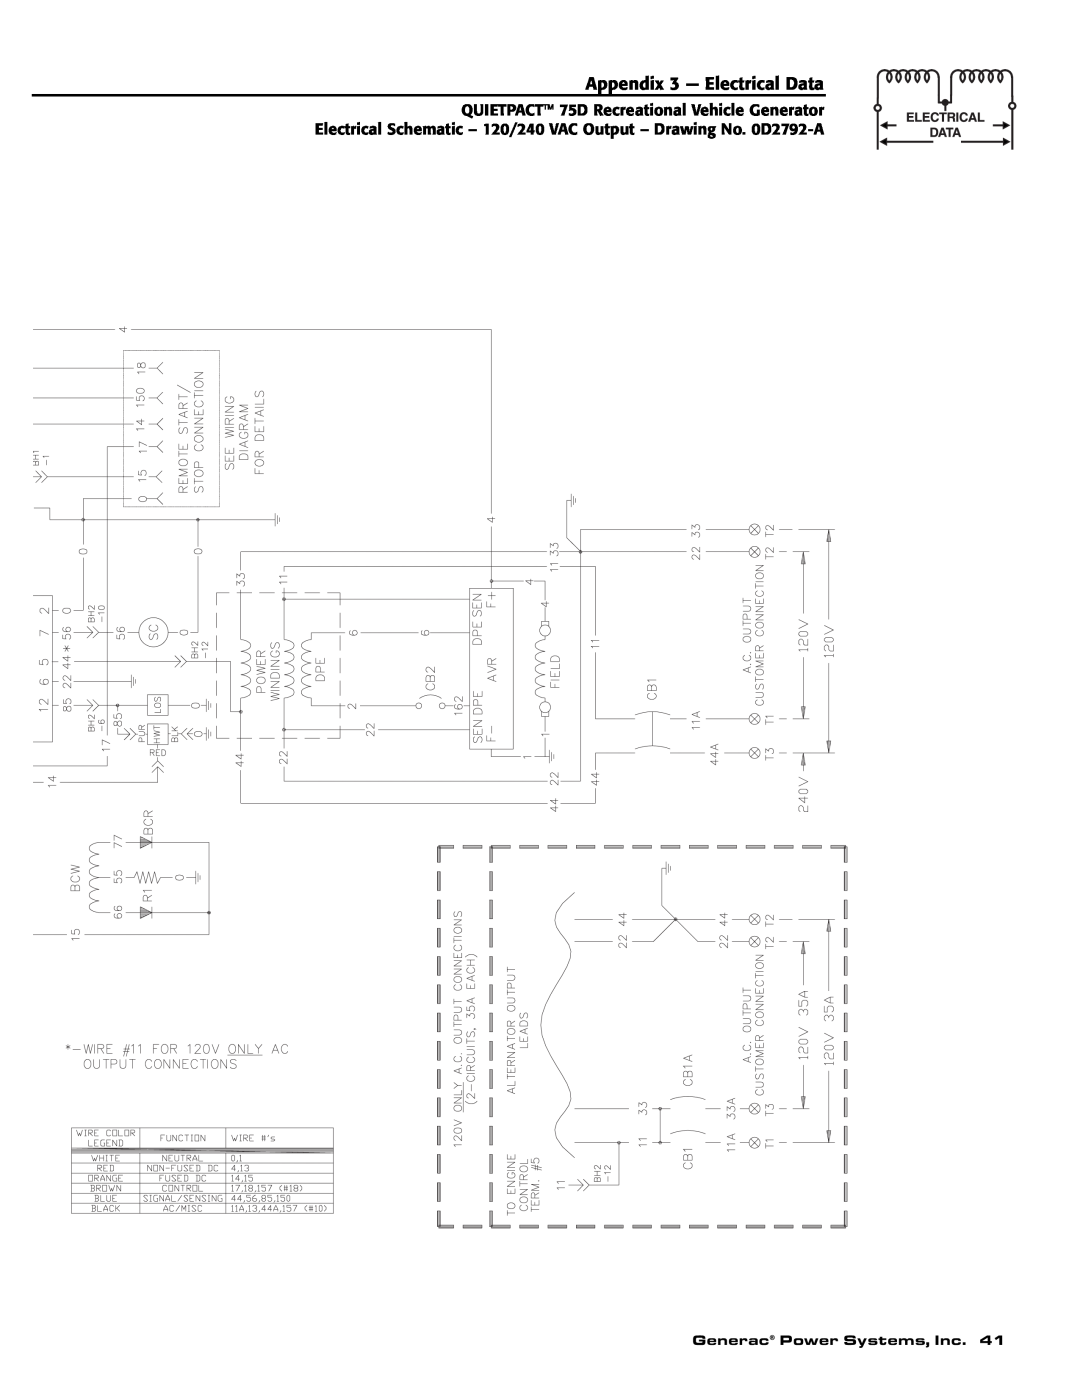 Guardian Technologies 004270-2 owner manual Appendix 3 - Electrical Data, Generac Power Systems, Inc 